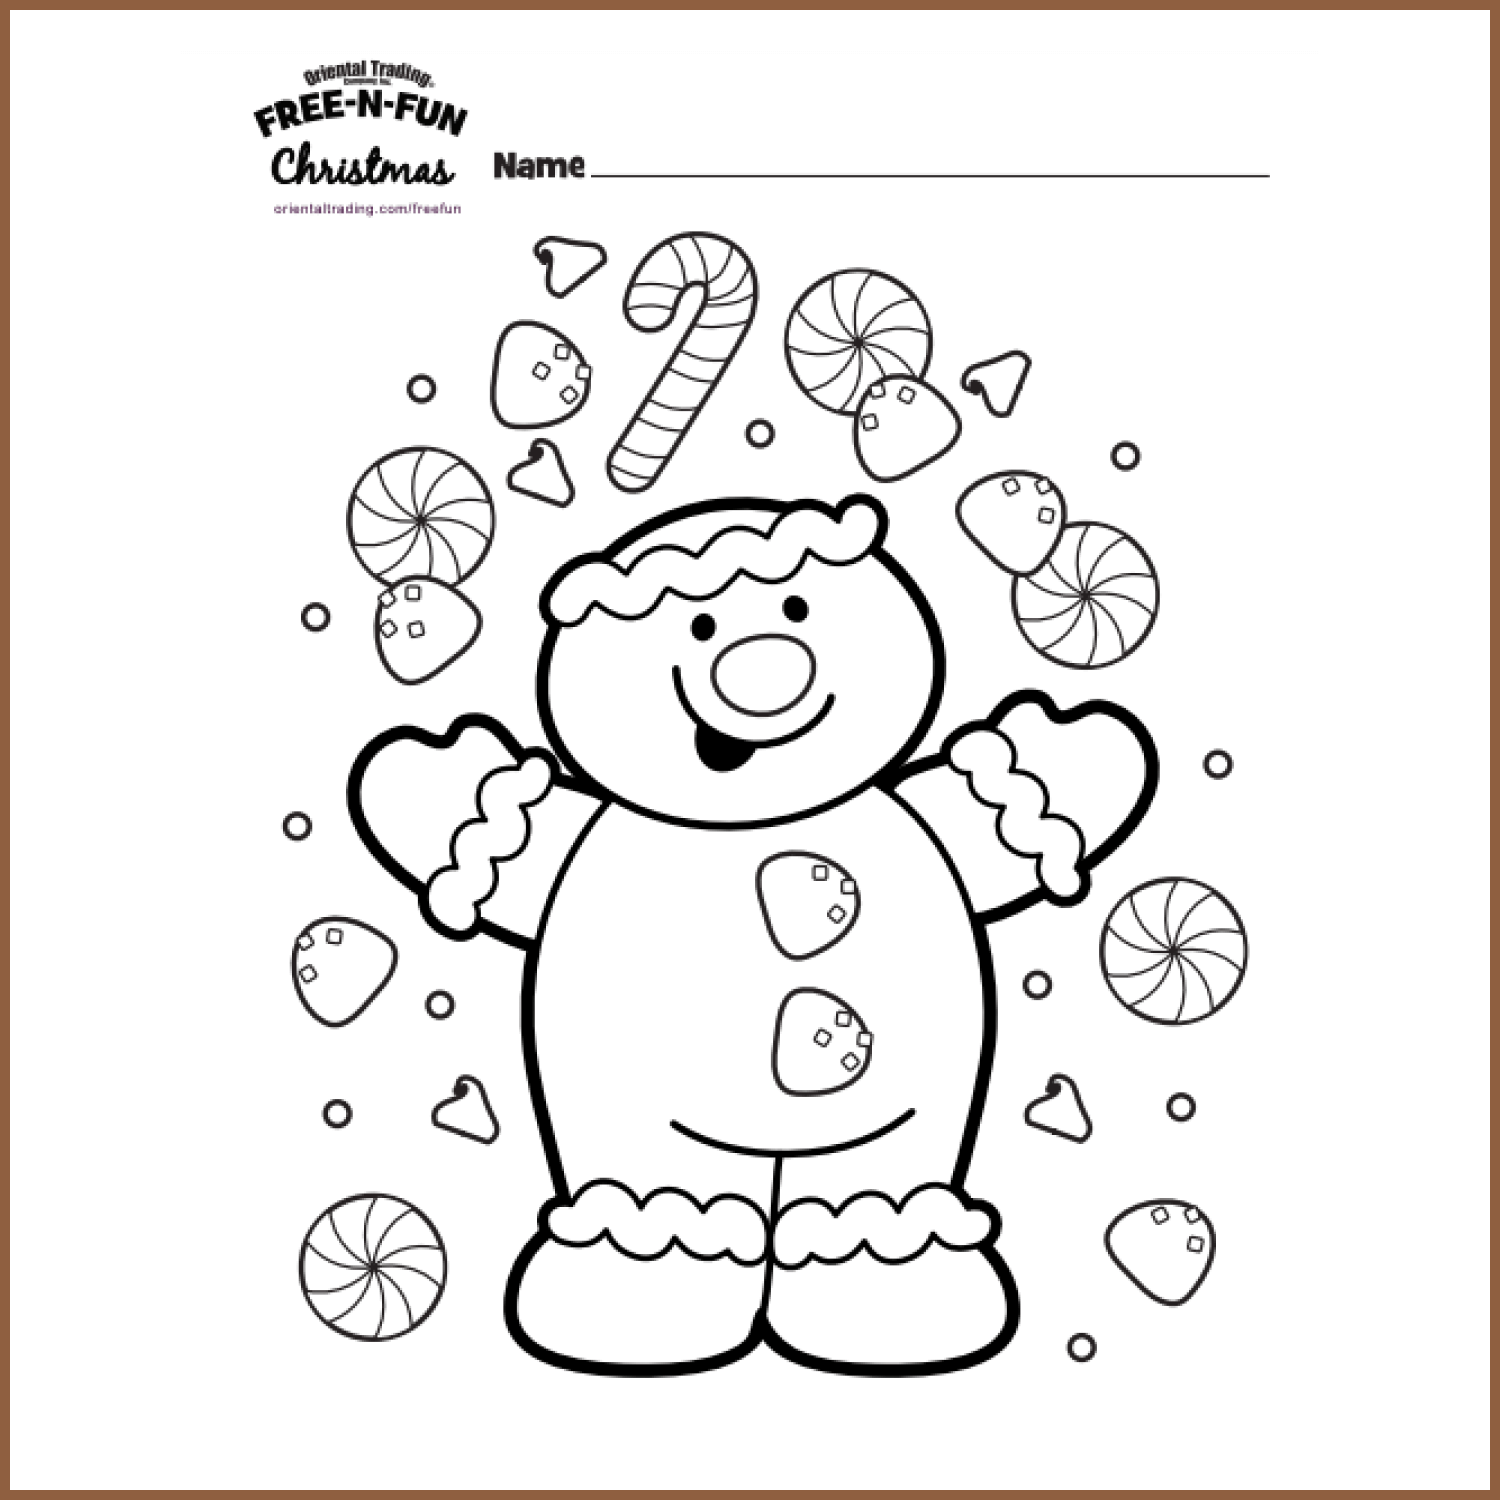 Gingerbread coloring page cover image.